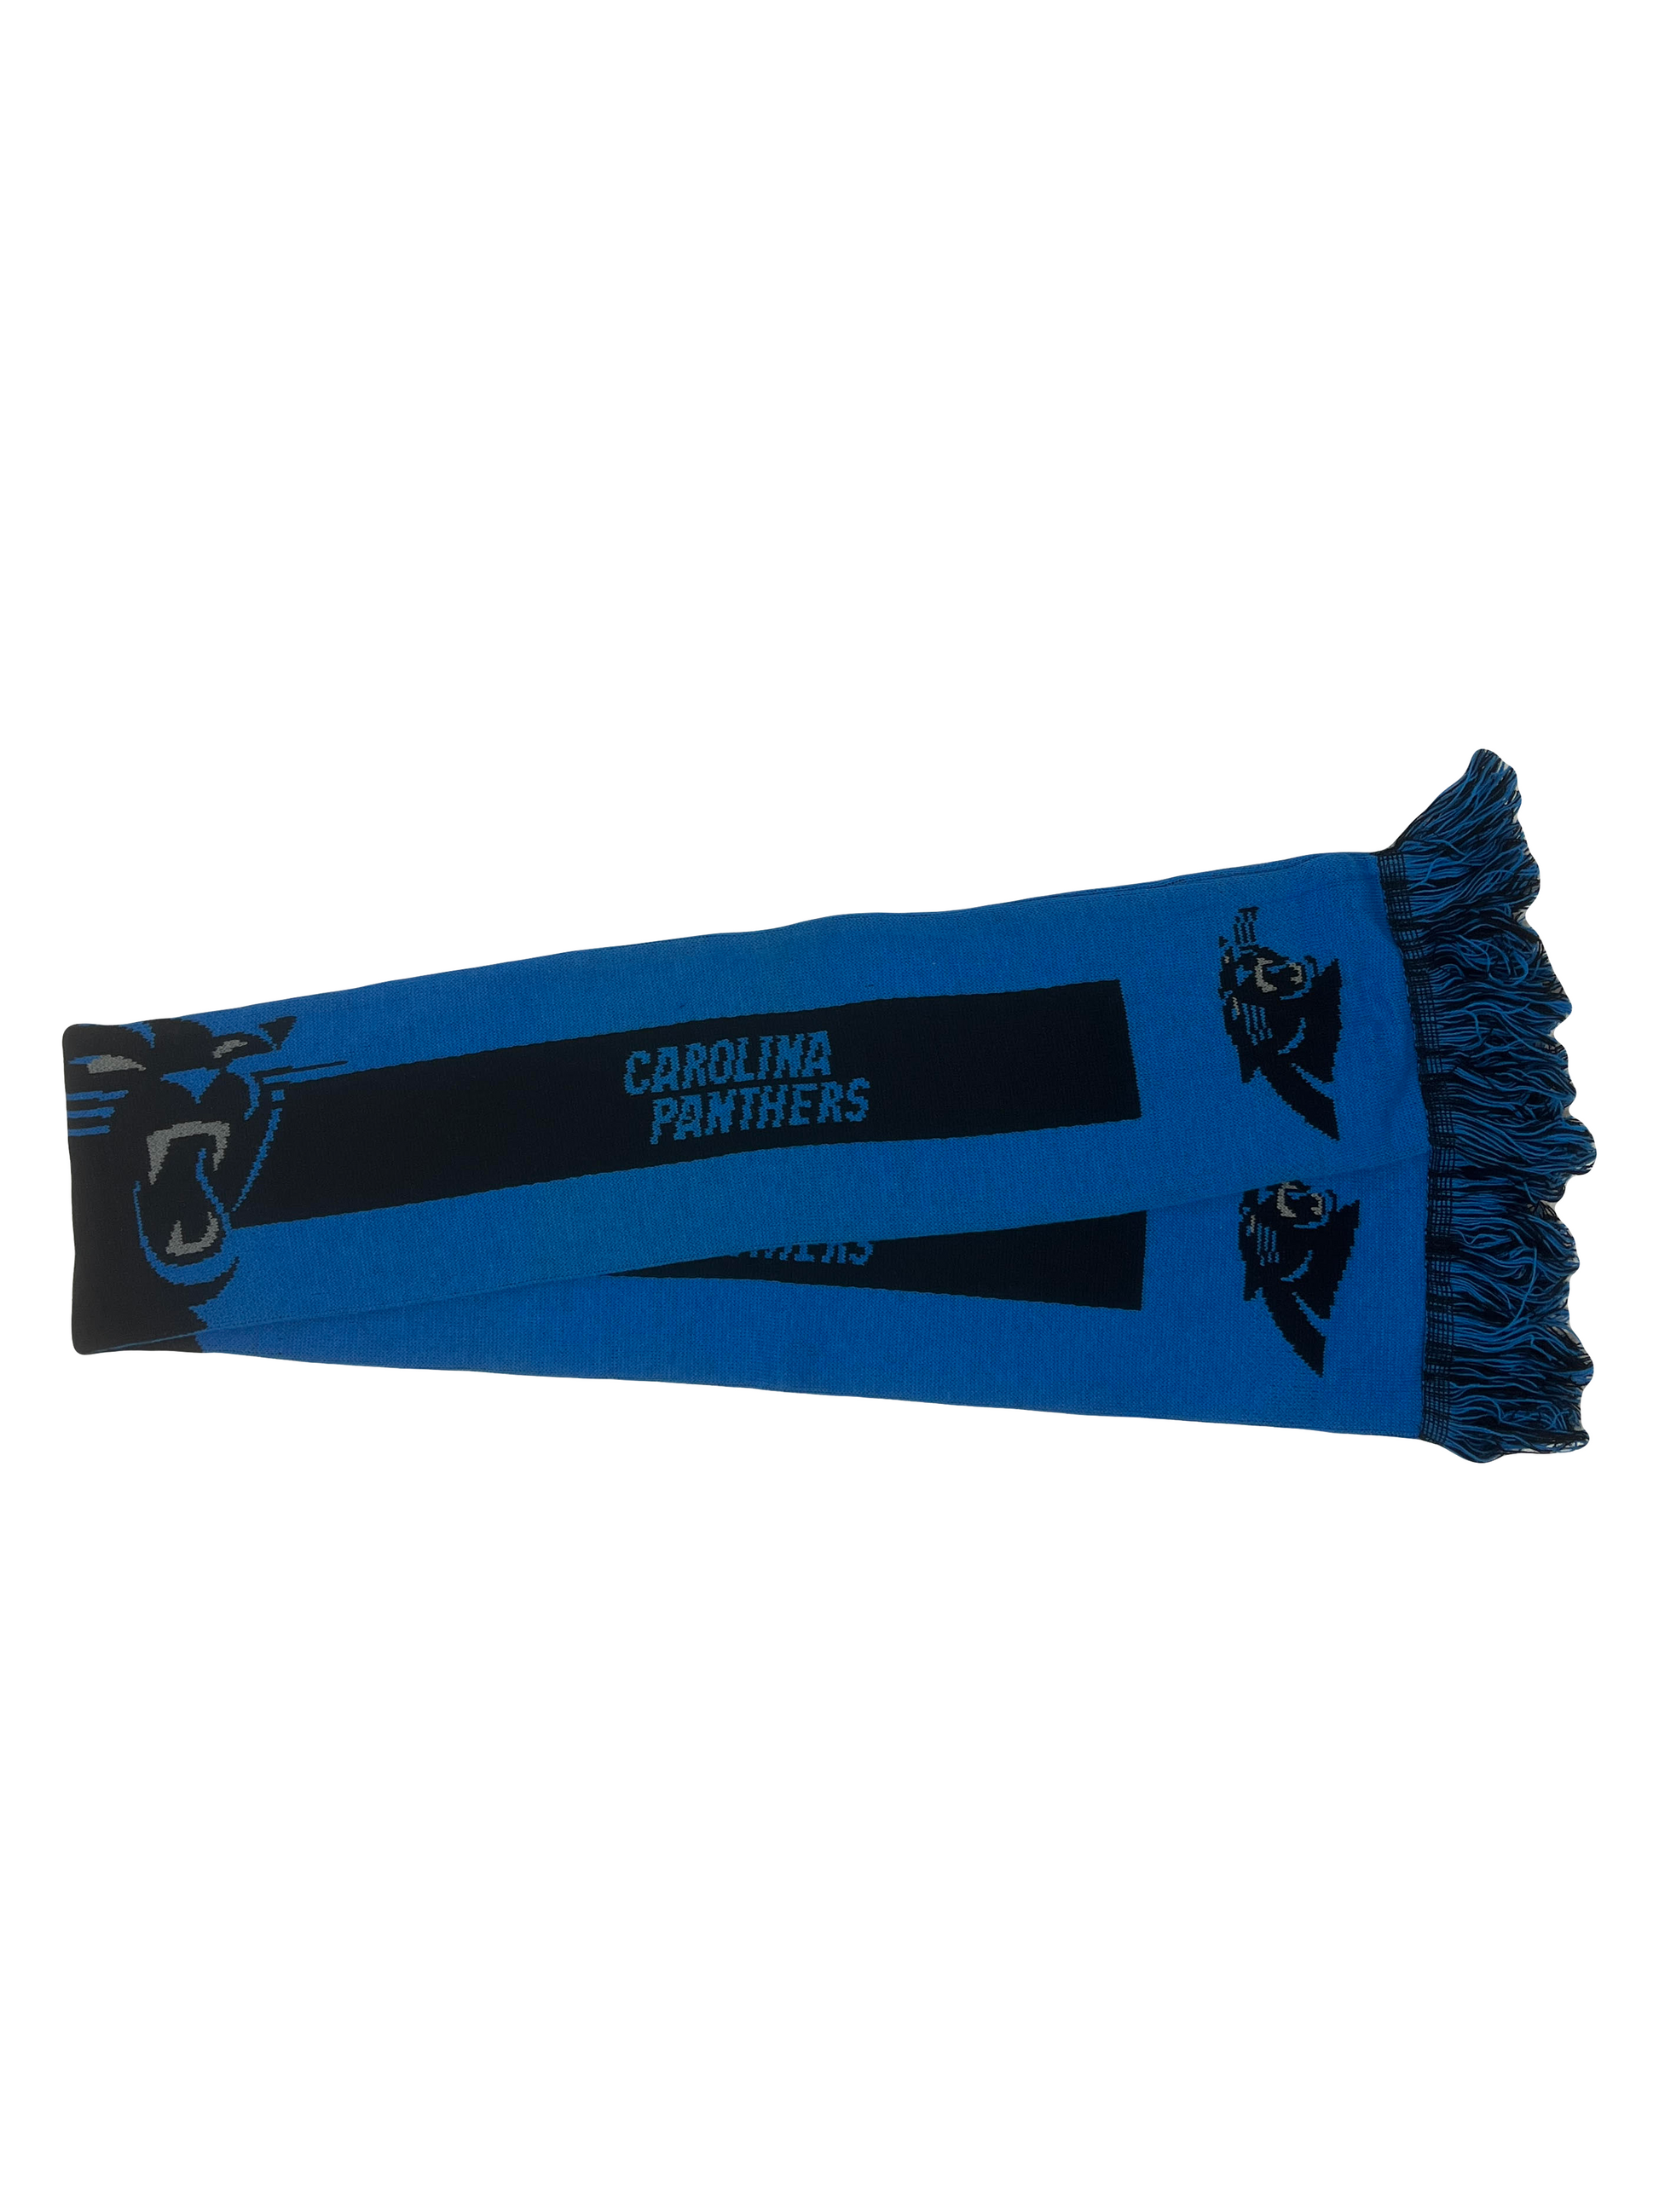 forever-collectibles-carolina-panthers-nfl-scarf